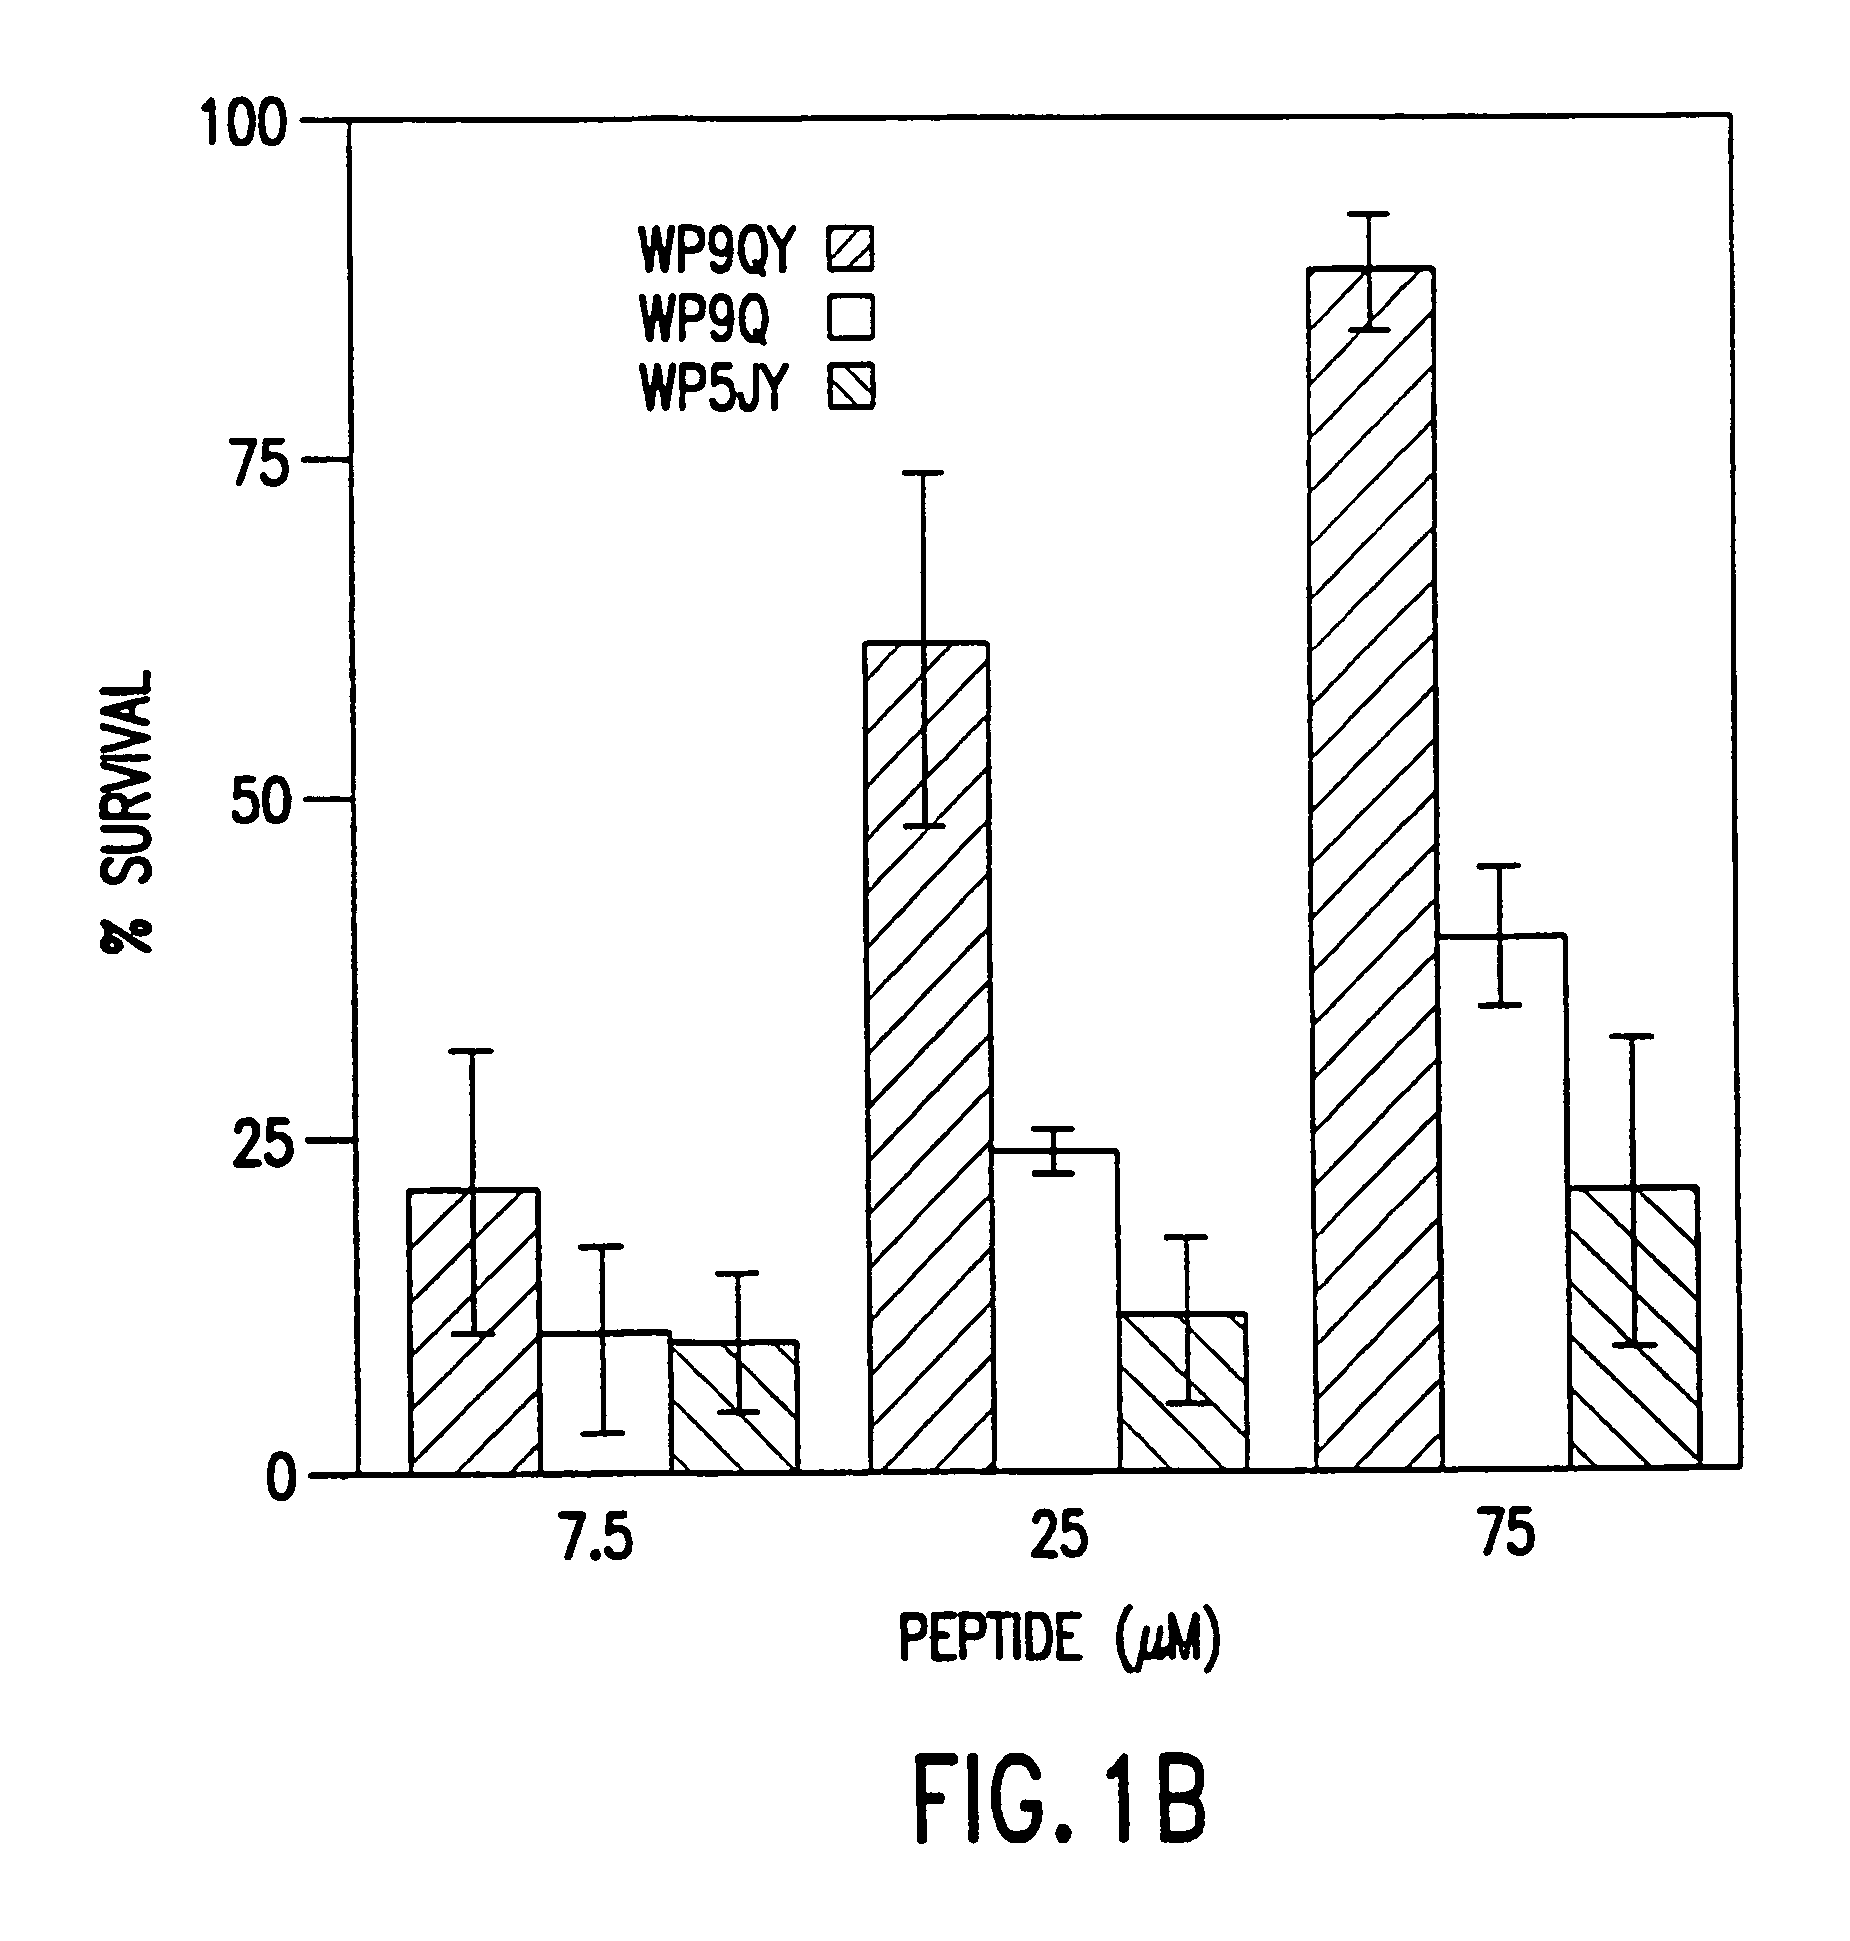 Cavity induced allosteric modification of intermolecular interactions and methods of identifying compounds that effect the same